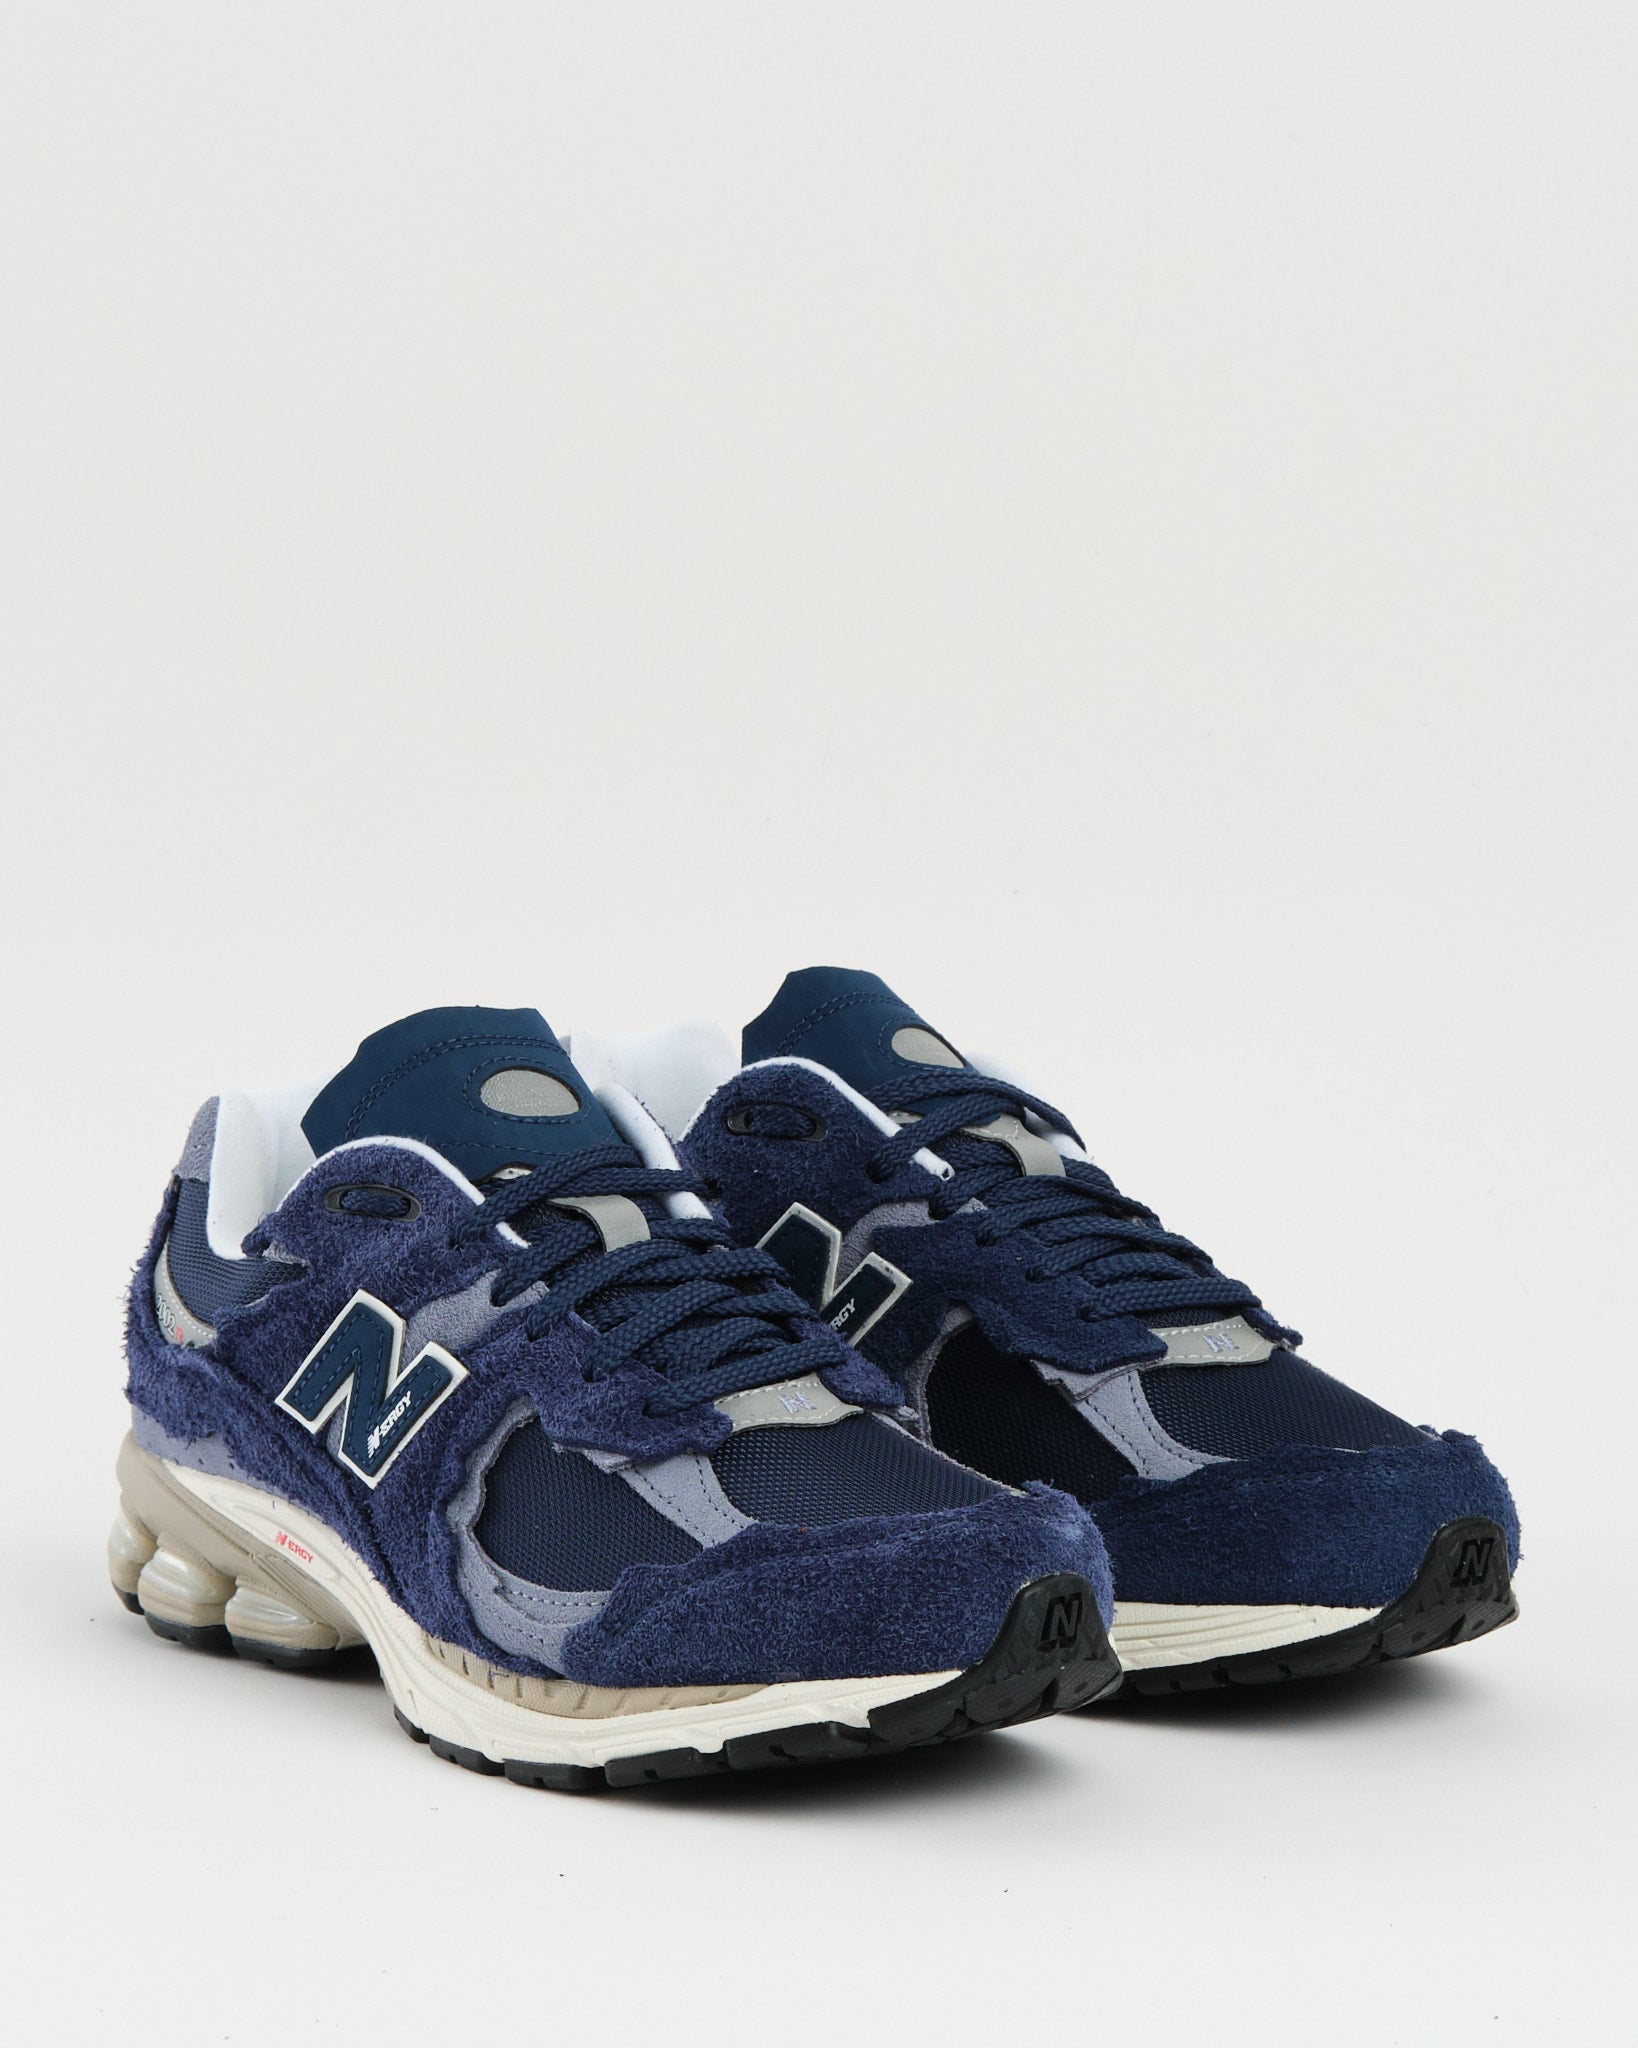 2002R Protection Pack NB NAVY M2002RDK